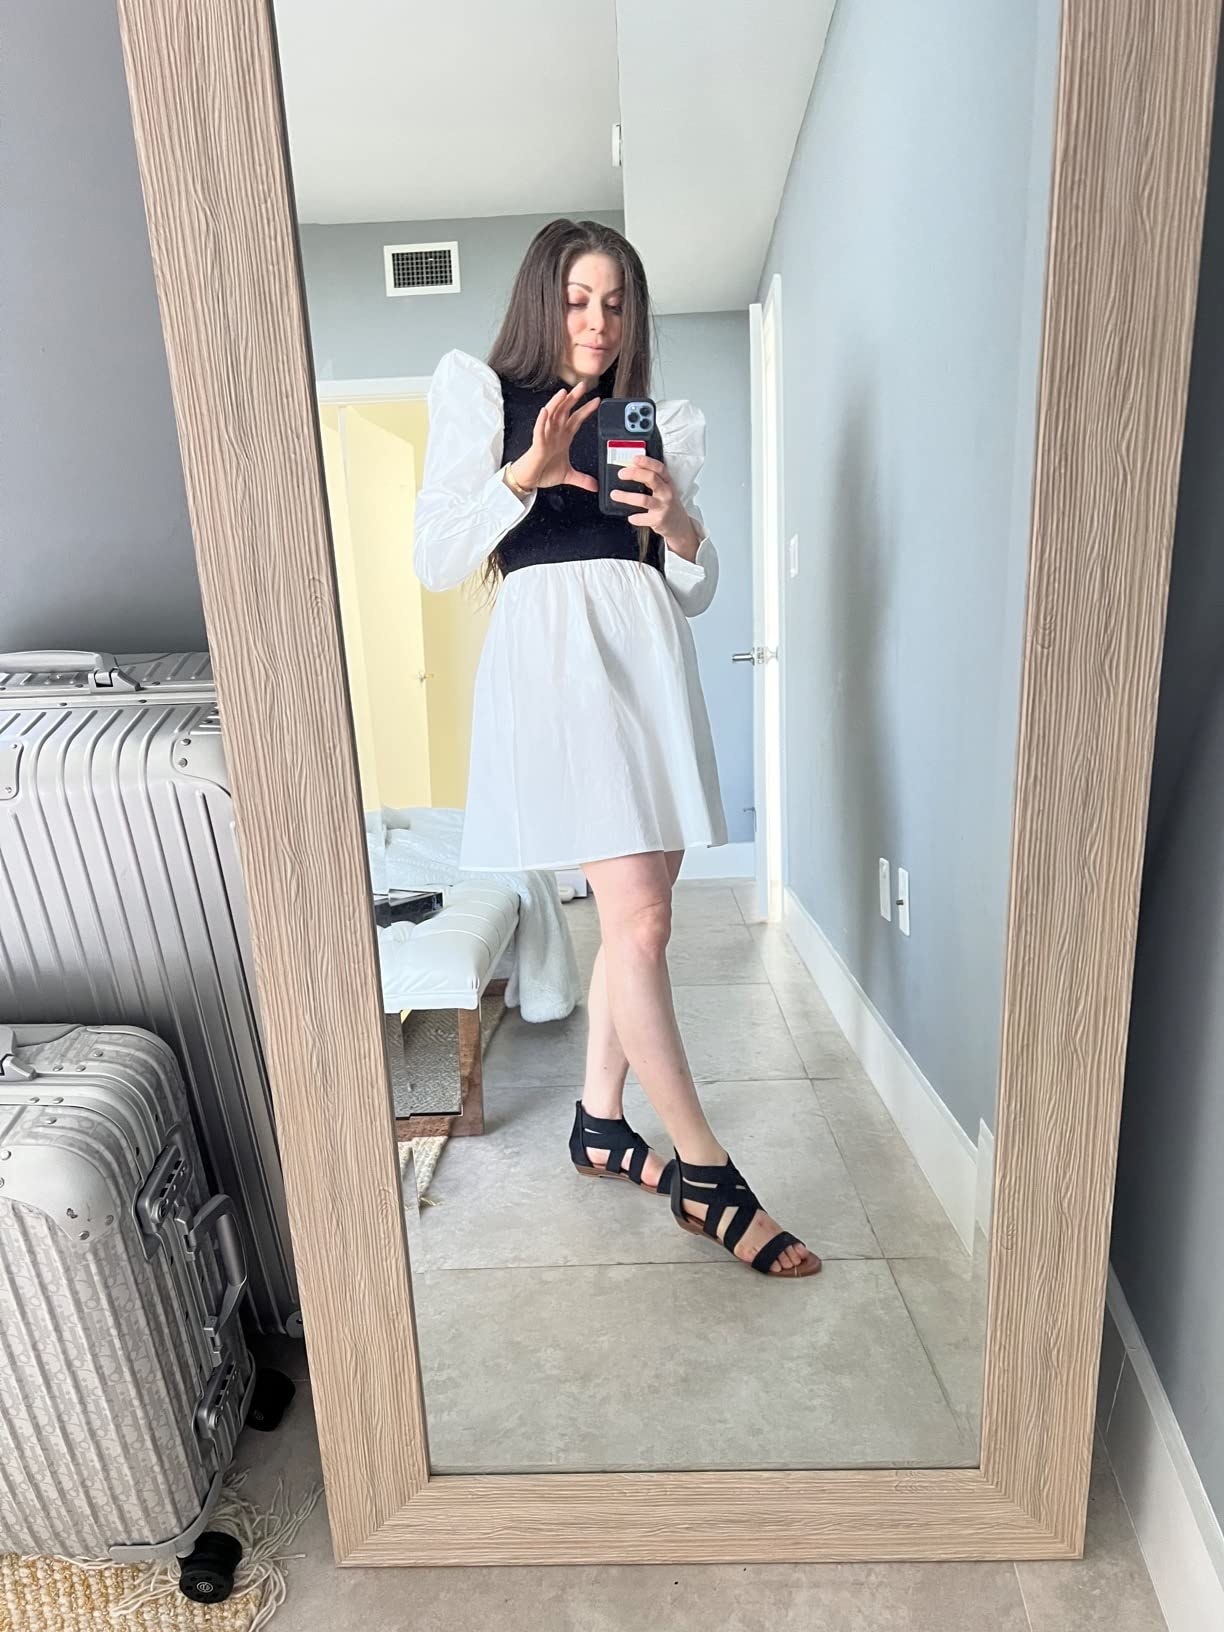 Amazon reviewer wearing black strappy sandals